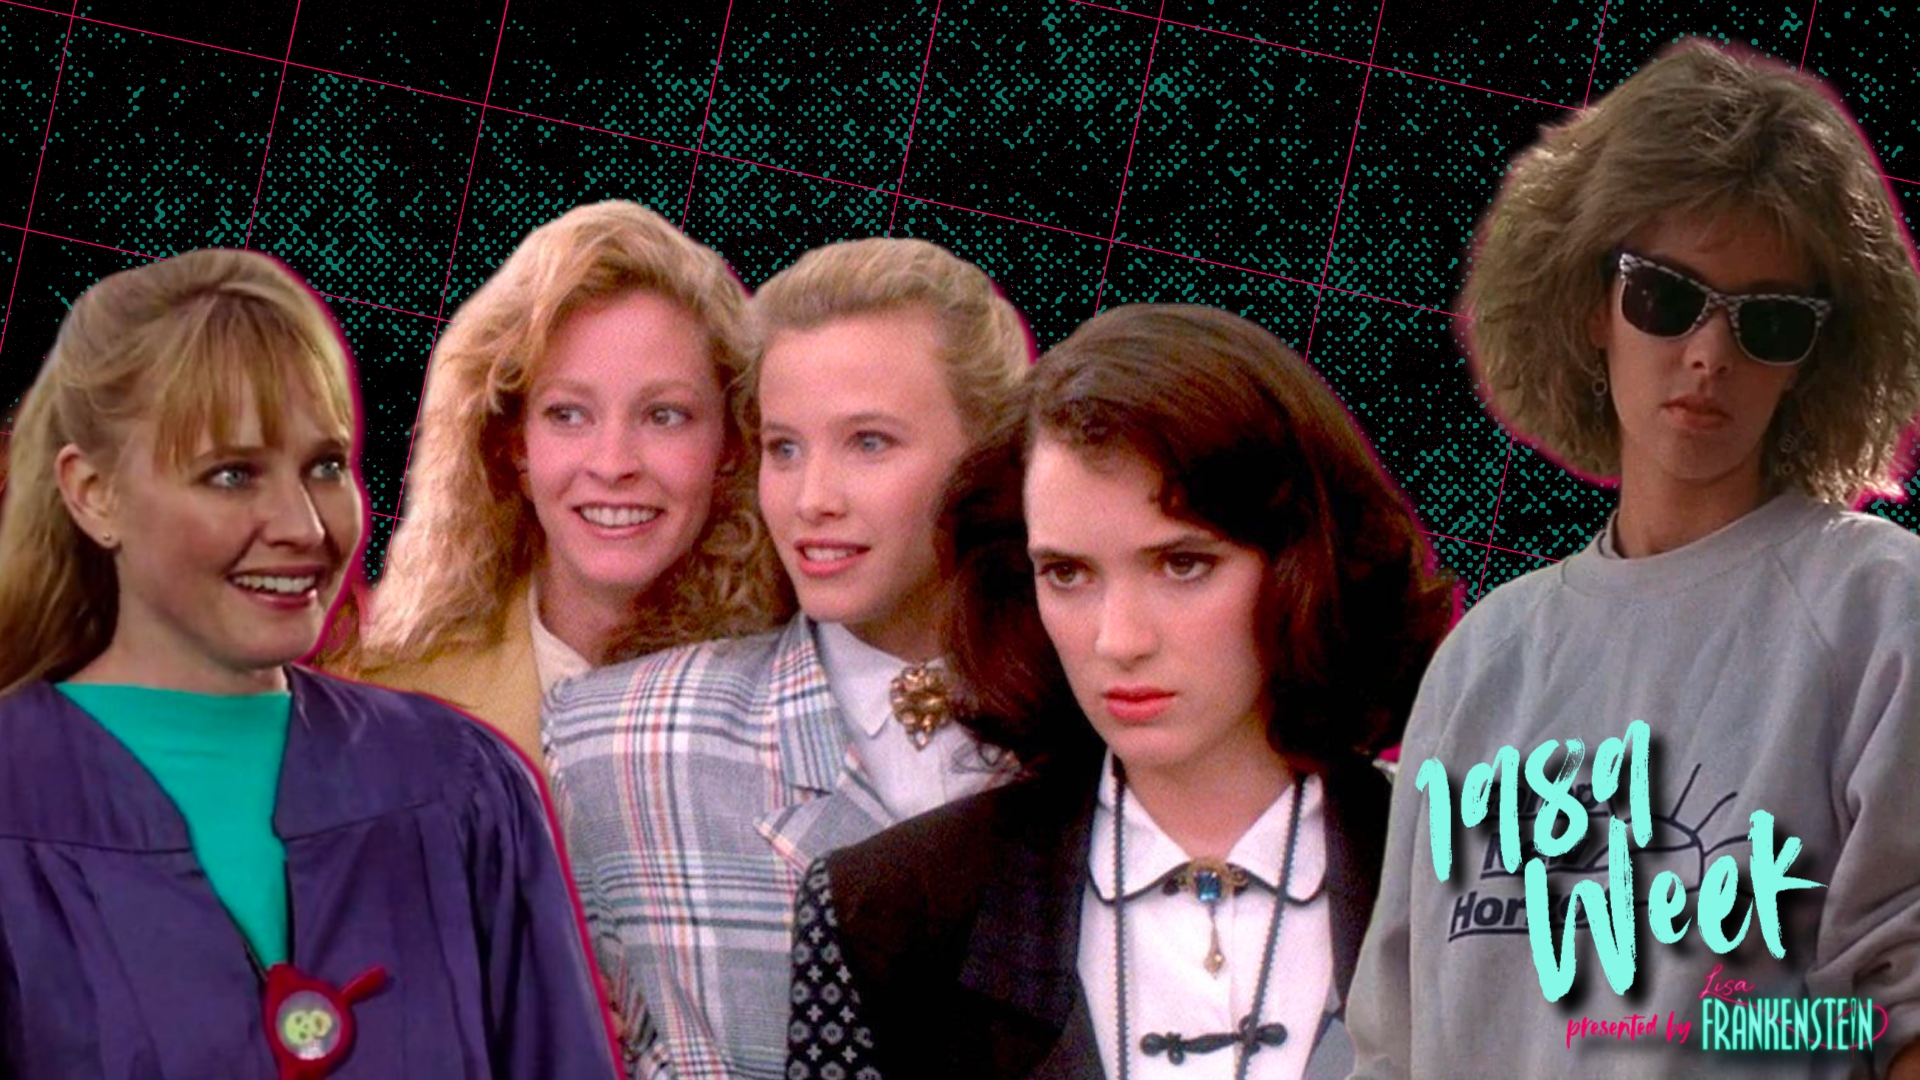 89 Hilarious Childhood Hairstyles From The '80s And '90s That Should Never  Come Back